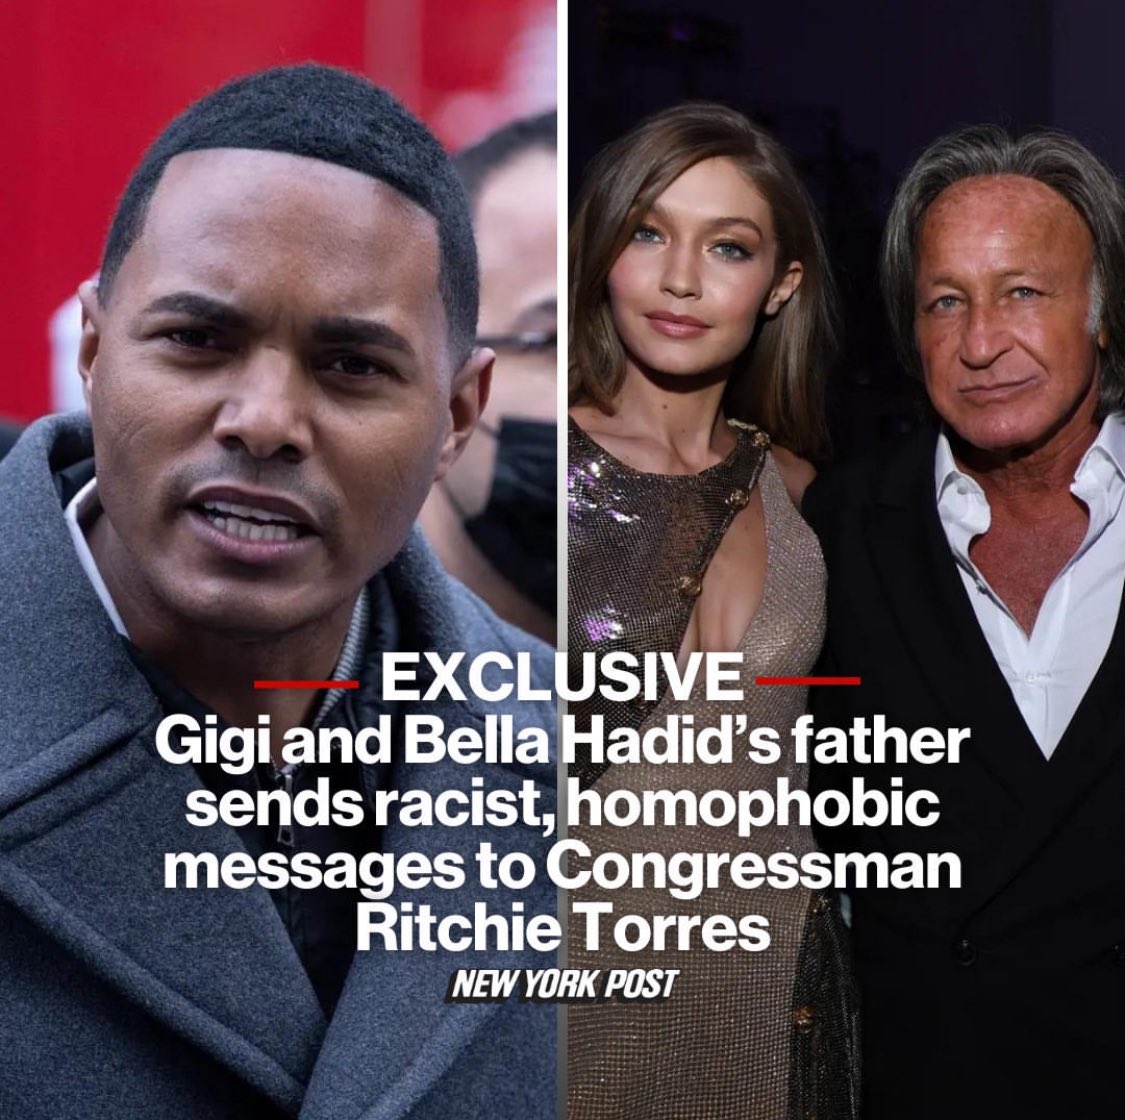 For the thought crime of supporting Israel in the wake of October 7th, I have been the target of racist rhetoric from Mohamed Hadid. If you have the audacity to be a person of color AND Pro-Israel, you become fair game for racist hate and harassment.